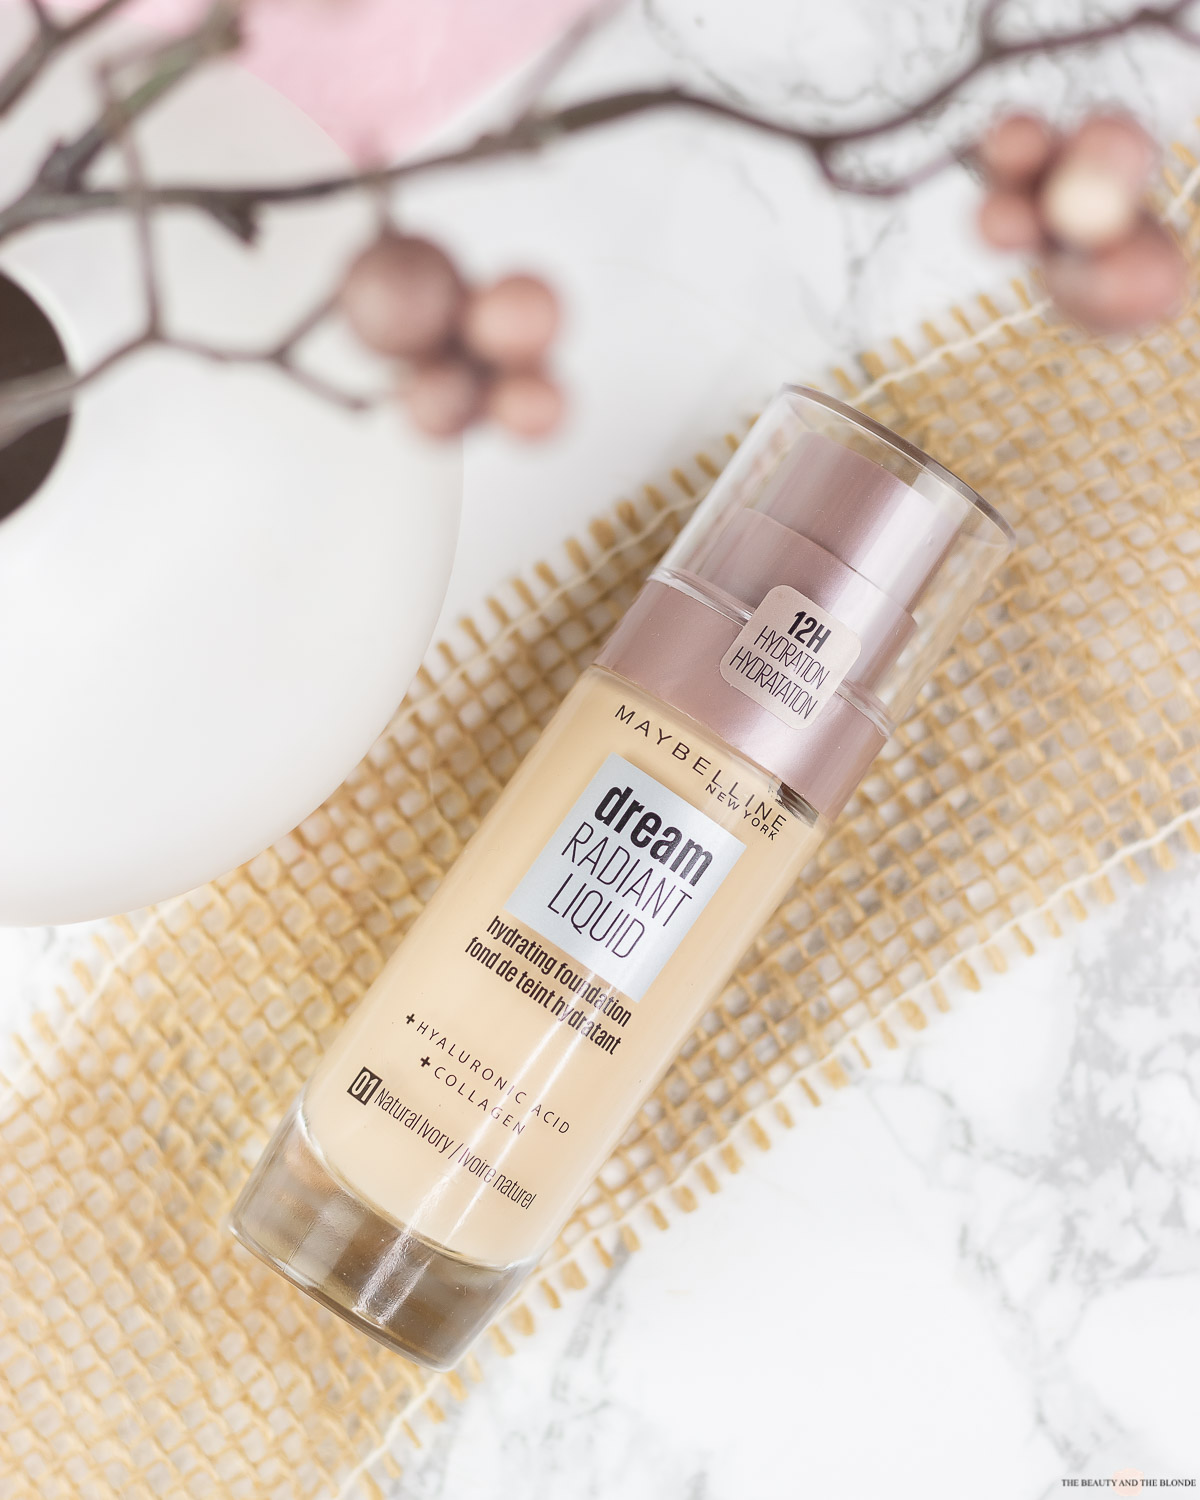 Maybelline Dream Radiant Liquid Foundation Review